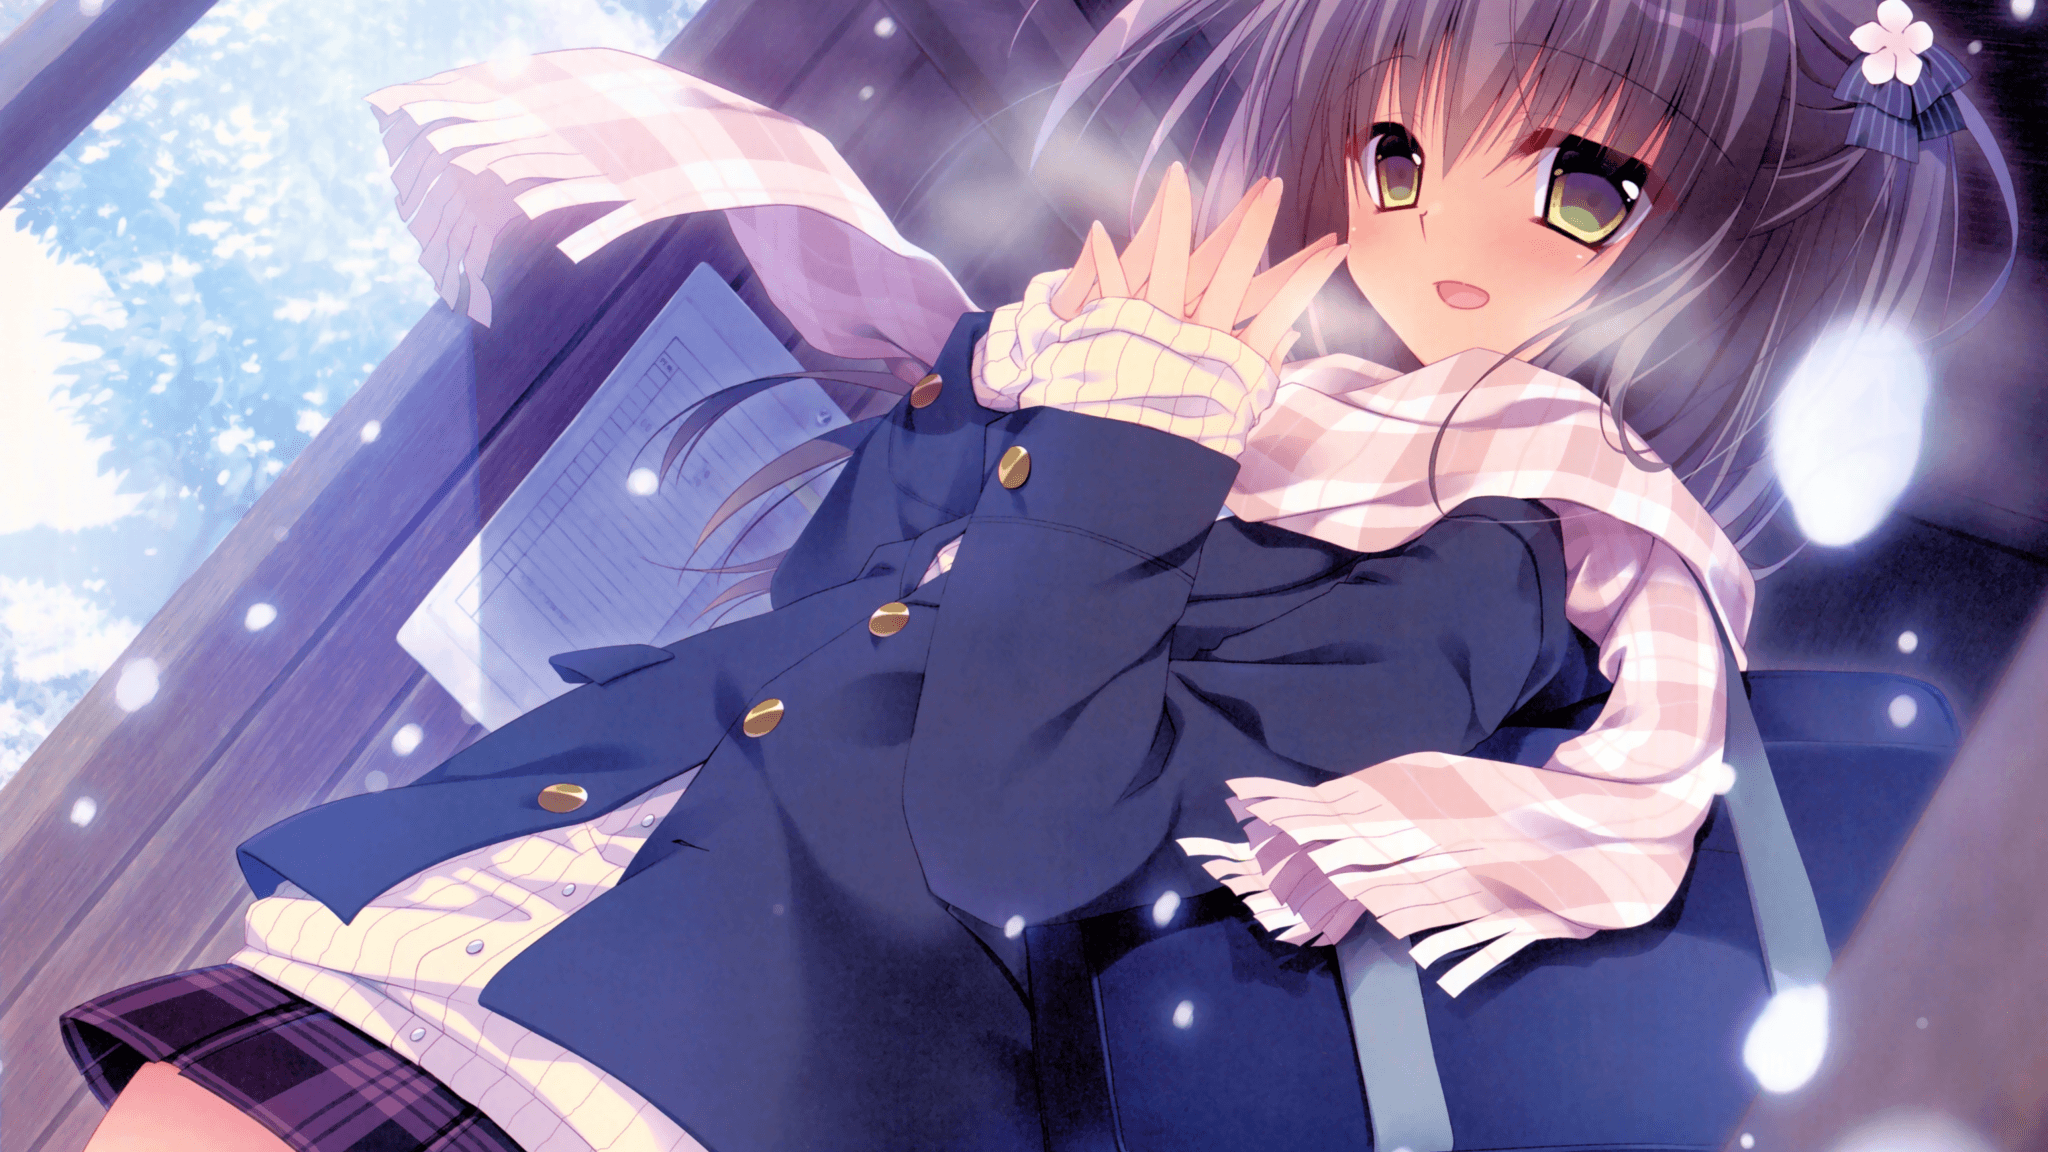 Download 2048x1152 Anime Girl, Winter, Scarf, Smiling, Shy